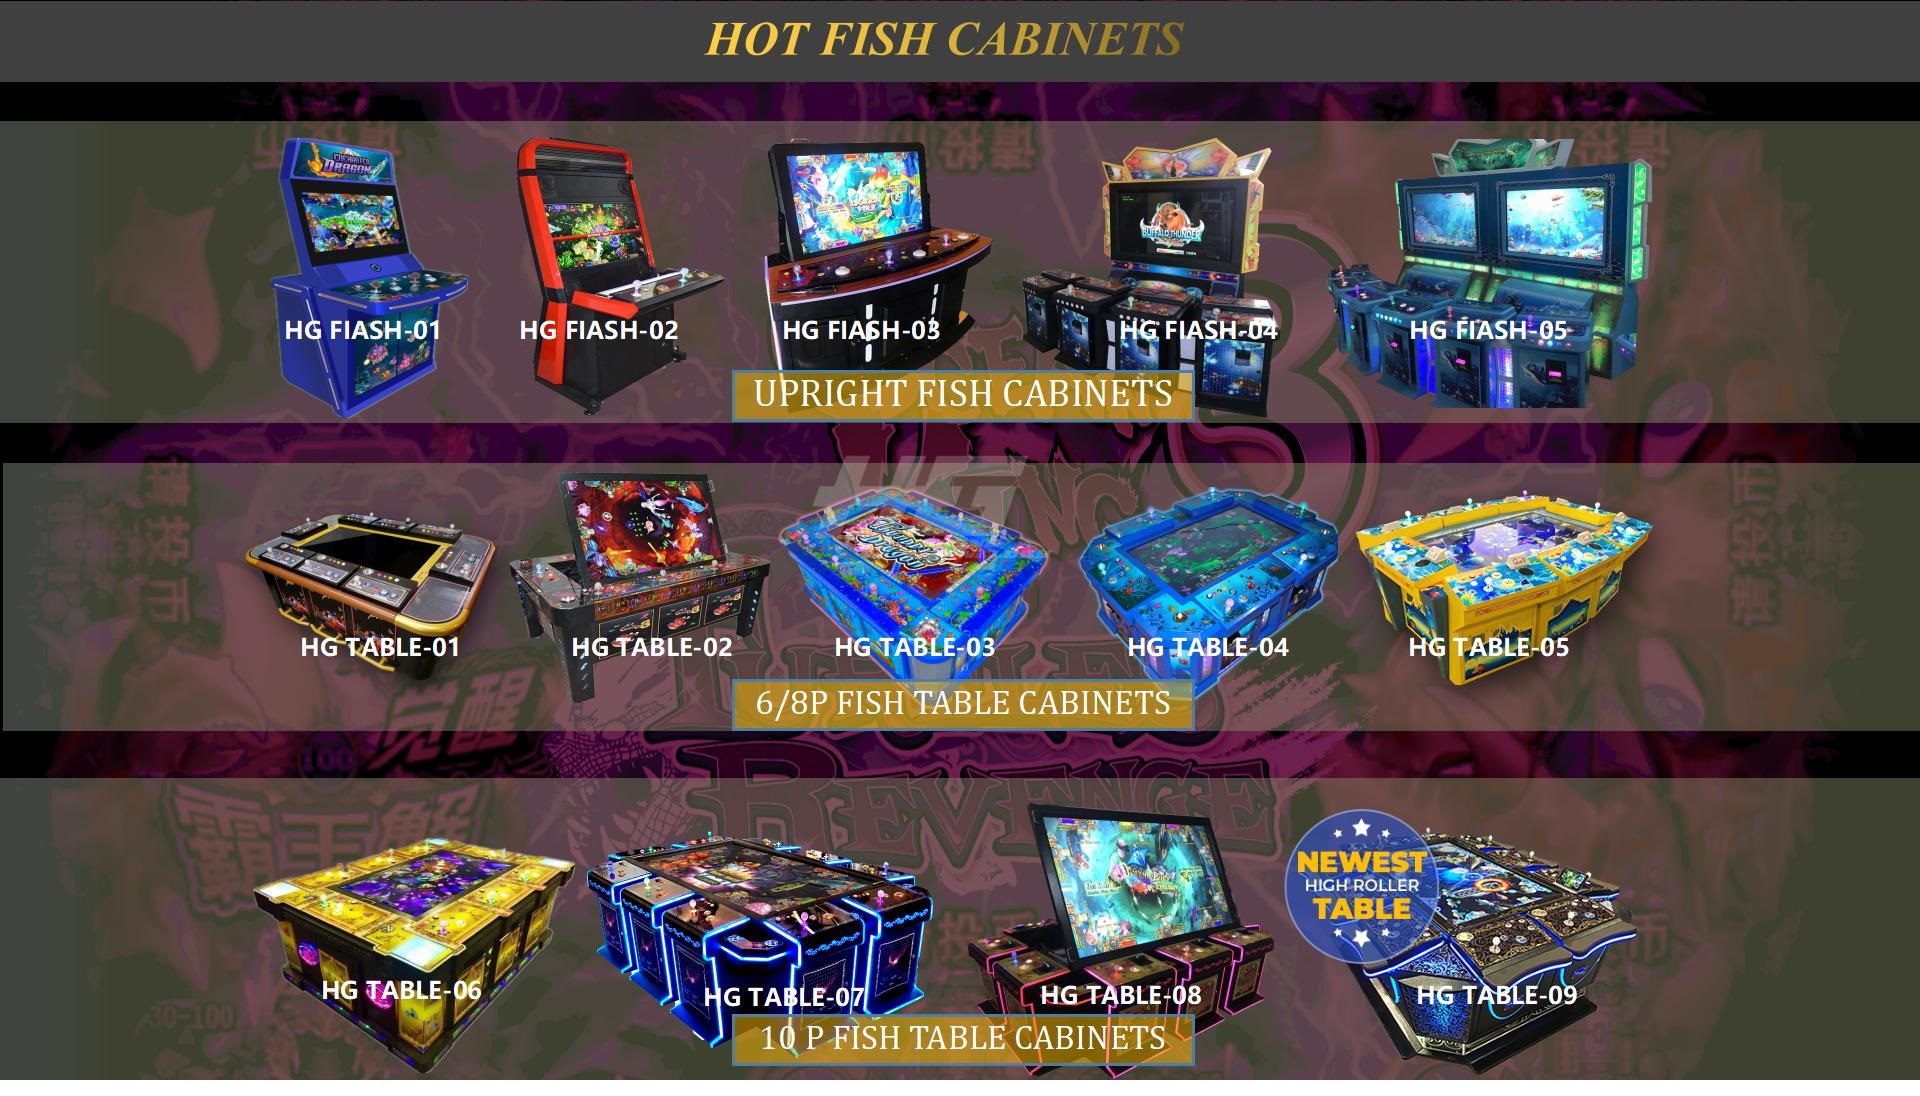 6 players fishing cabinet,6 players fish table,8 players fishing cabinet,8 players fish table,fish cabinets,fishing table,igs,igs fishing game,fish code box,fish code box,install fishing game,install fish cabinets,6 players fire phoenix fishing game,fire phoenix fish table,ocean king 3 plus blackbeard